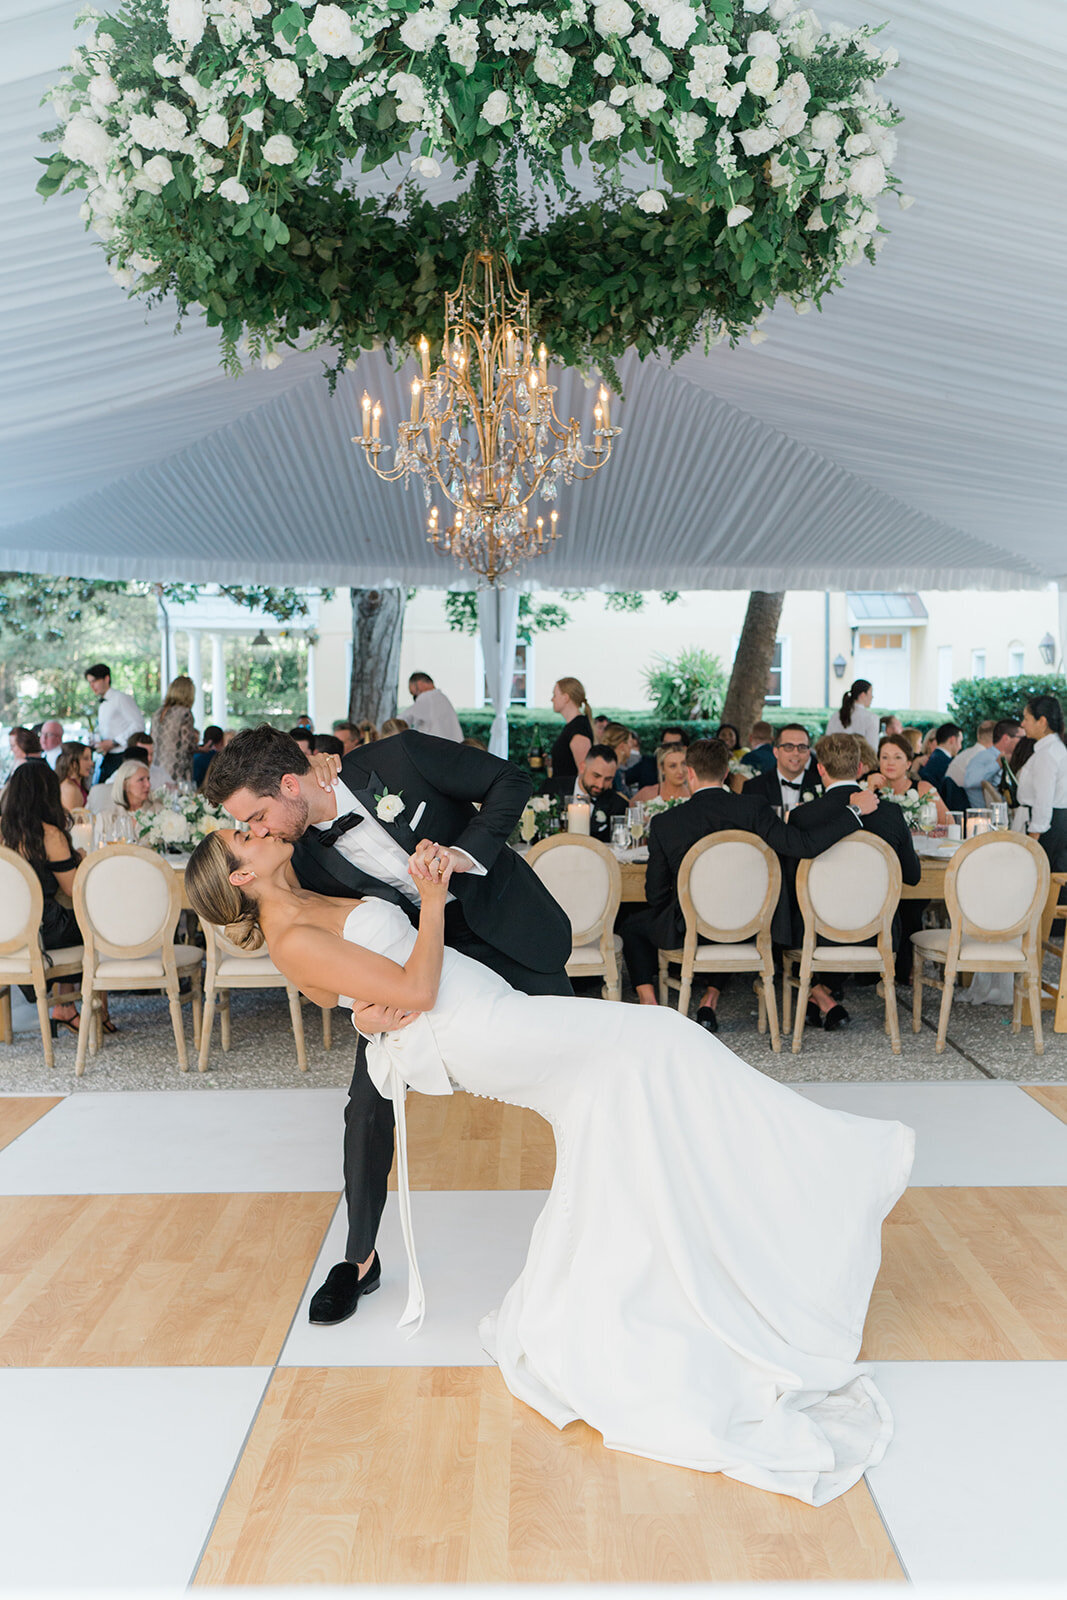 Bride and groom dip kiss on the checkerboard dance floor in draped tent with chandelier circled in white and green flowers. Spring destination wedding in Charleston.